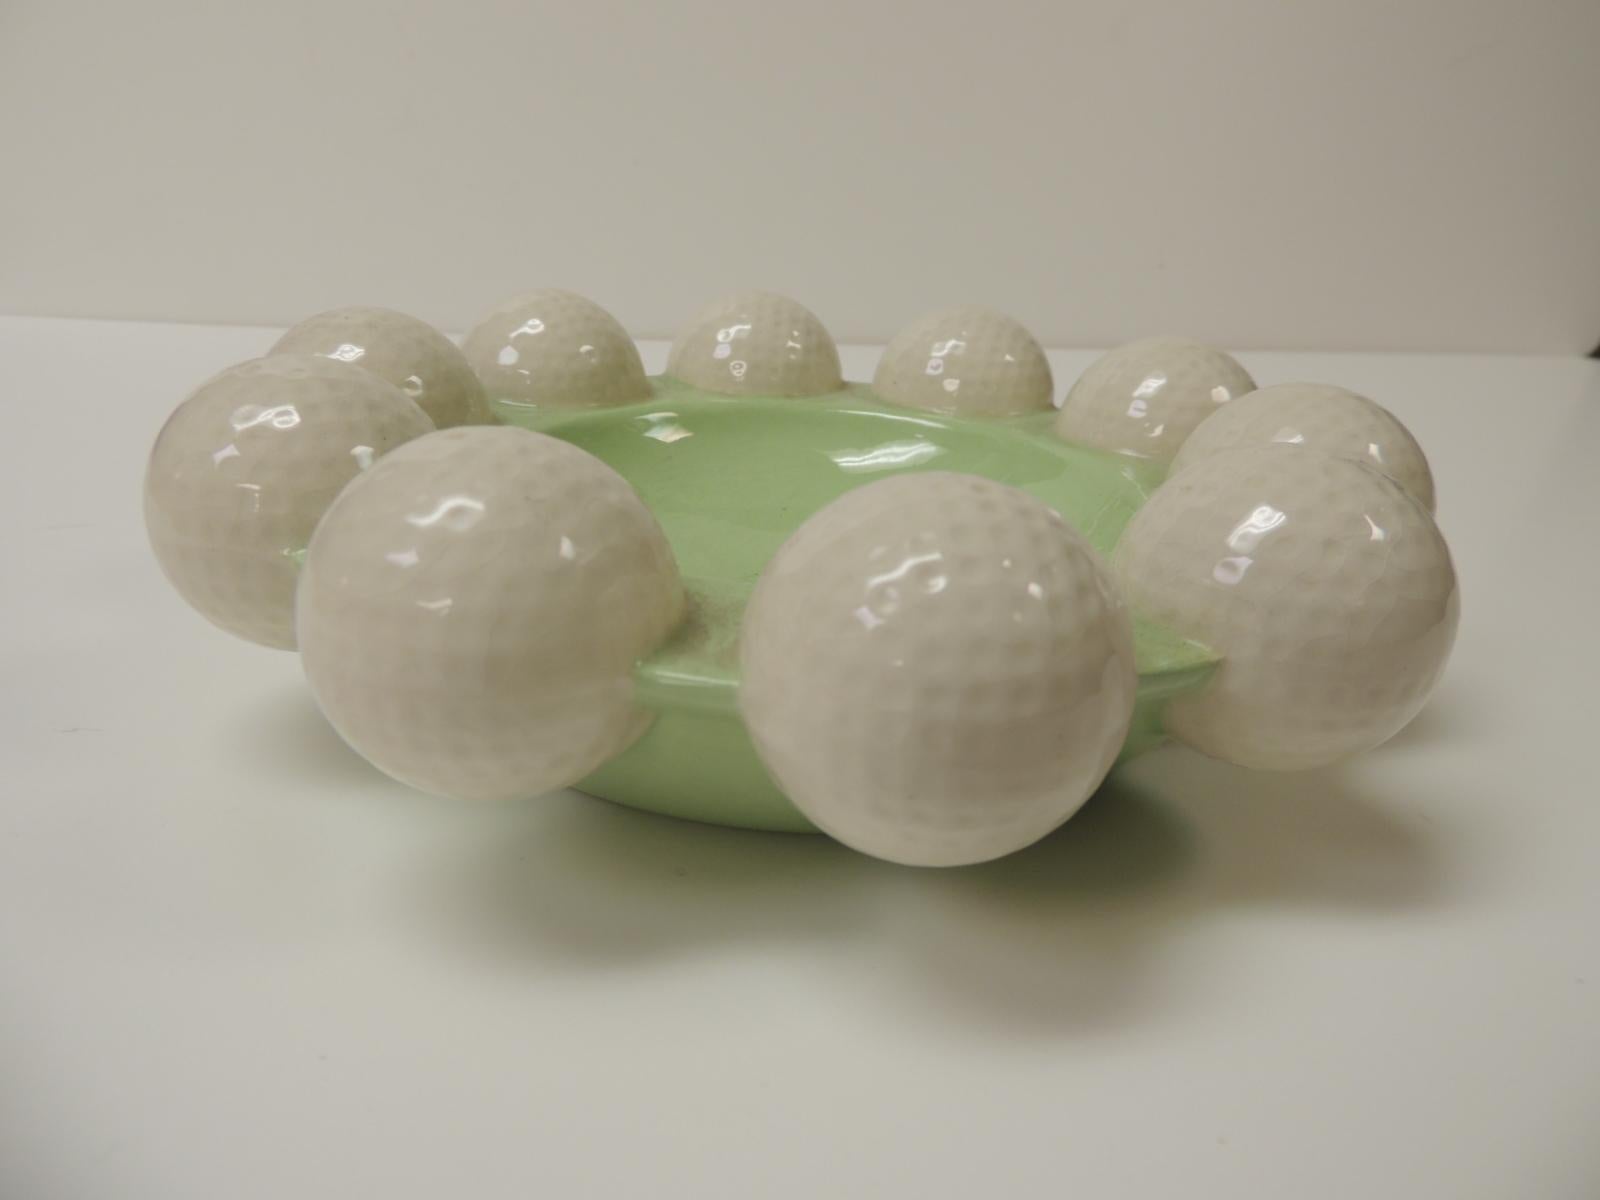 Celadon green and white glazed ceramic round golf balls ashtray from 1980’s Holland with realistic details on the golf balls
Dimensions: 8.5